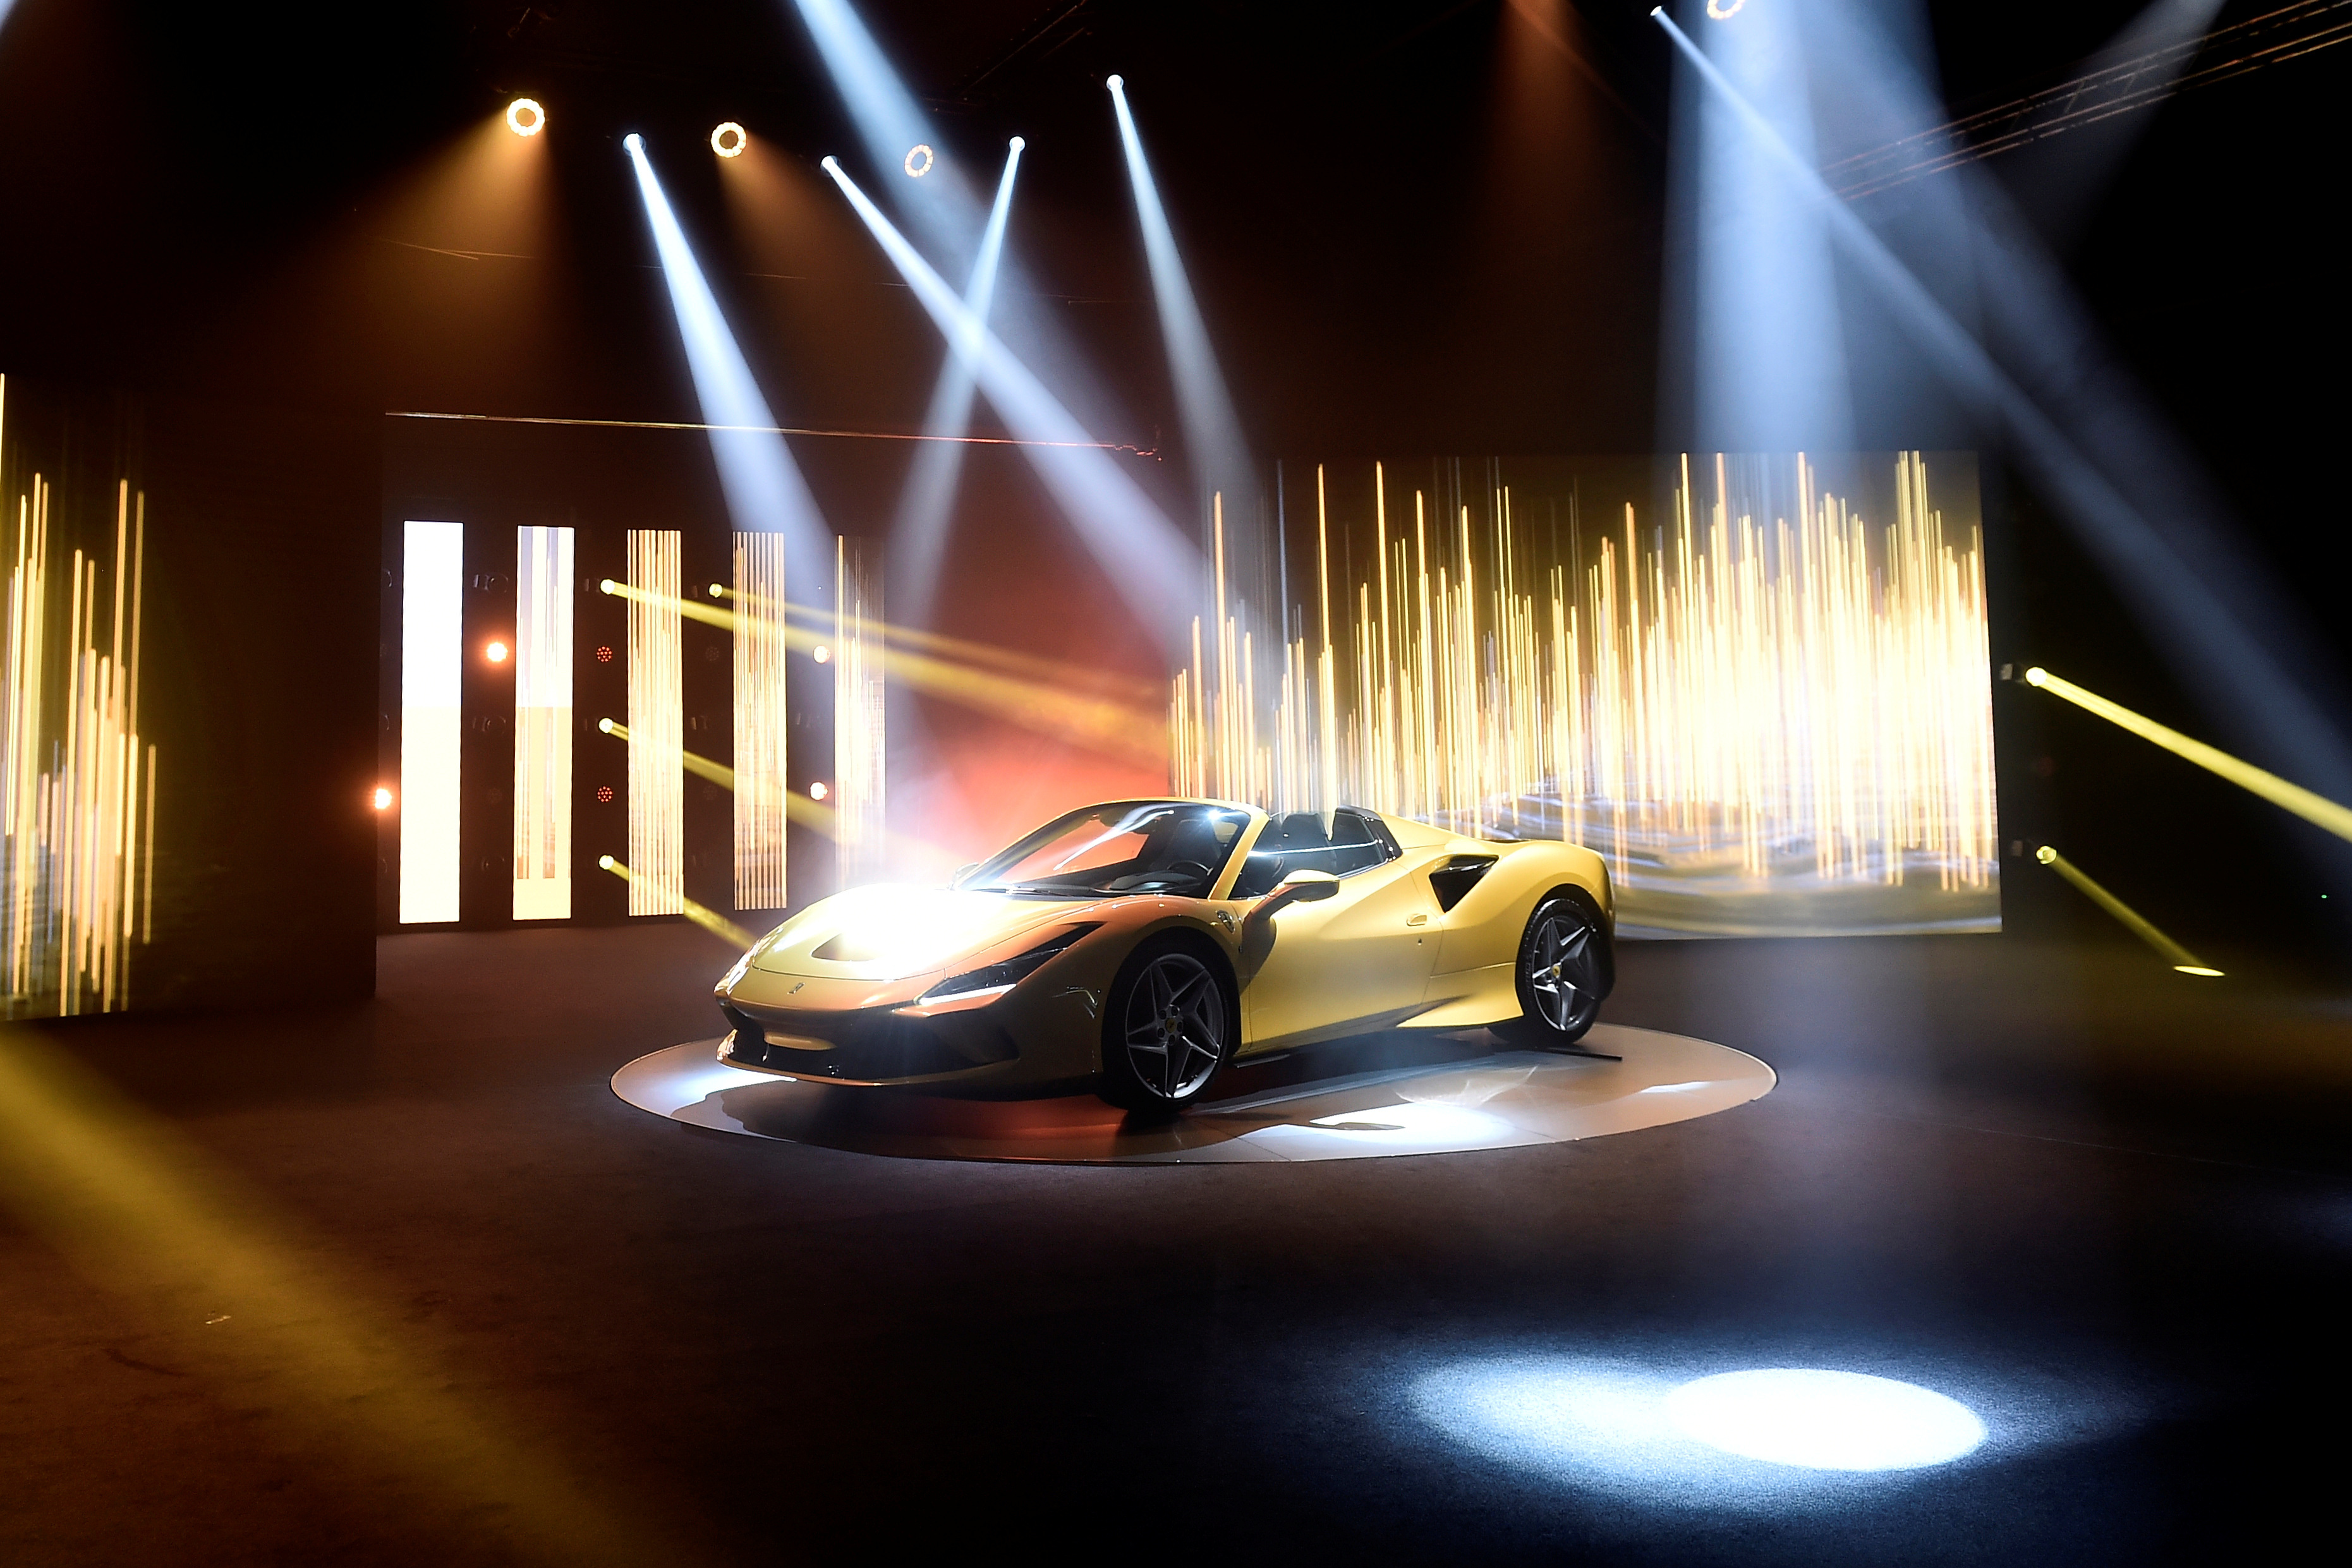 Ferrari F8 Spider is unveiled during a presentation of two new Ferrari models at an event at the company's headquarters in Maranello